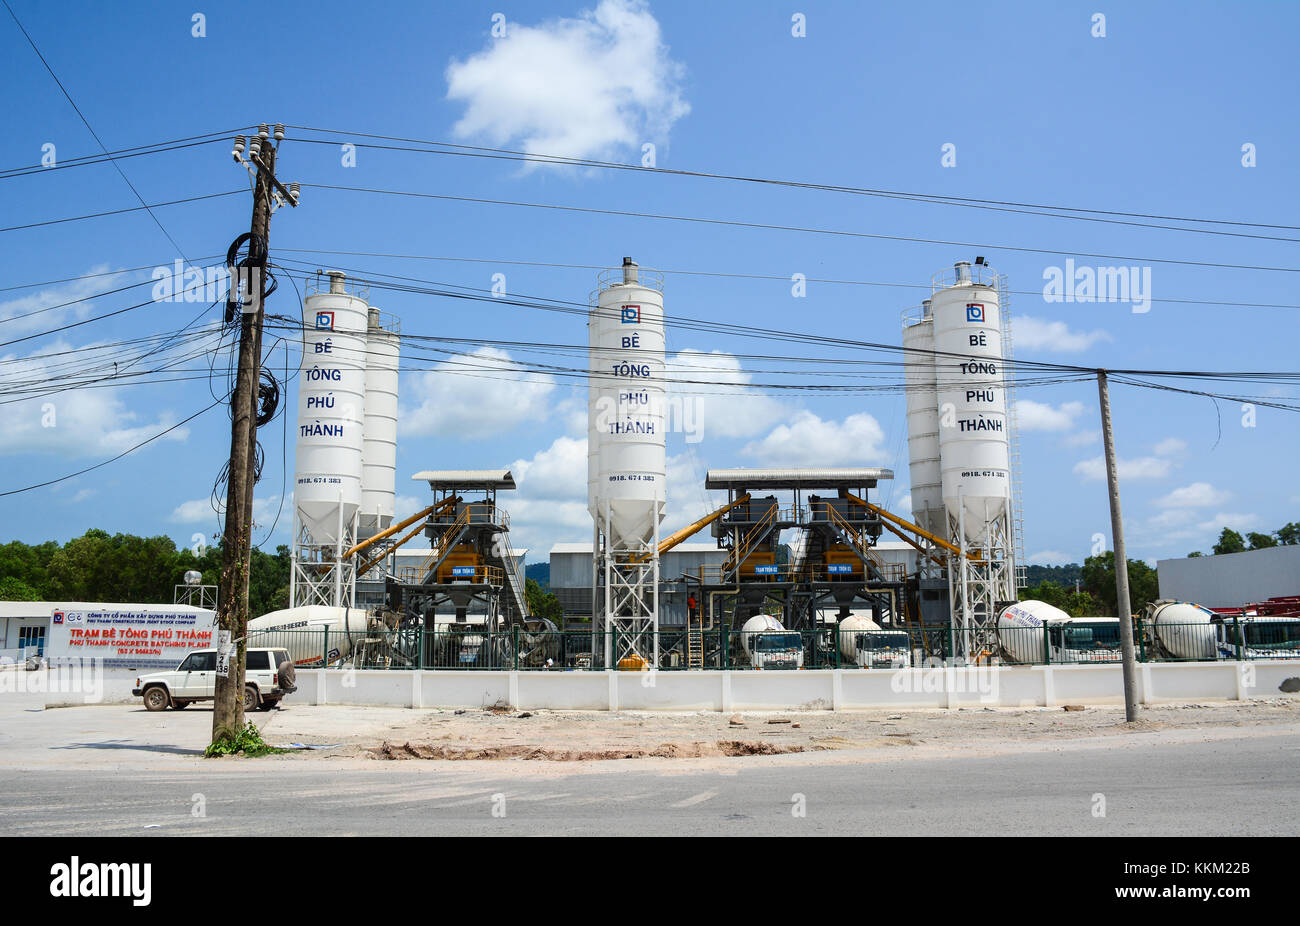 Phu Quoc, Vietnam - May 11, 2016. Cement factory at Phu Quoc island, Vietnam. Phu Quoc is the largest island in Vietnam, has a total area of 574 squar Stock Photo